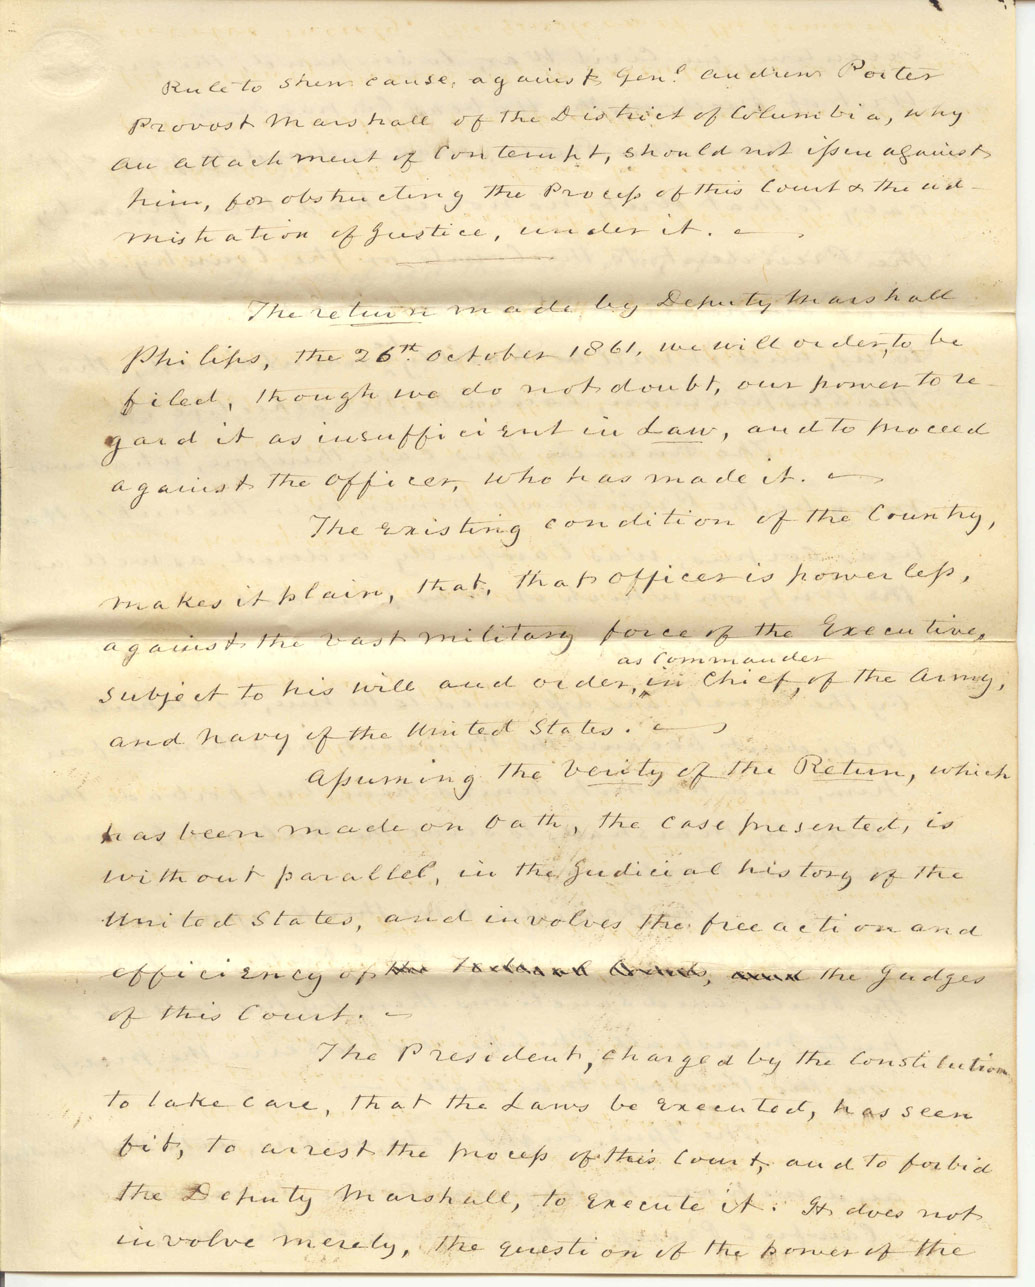 Opinion of the Court (page 2 of 3), dated October 30, 1861